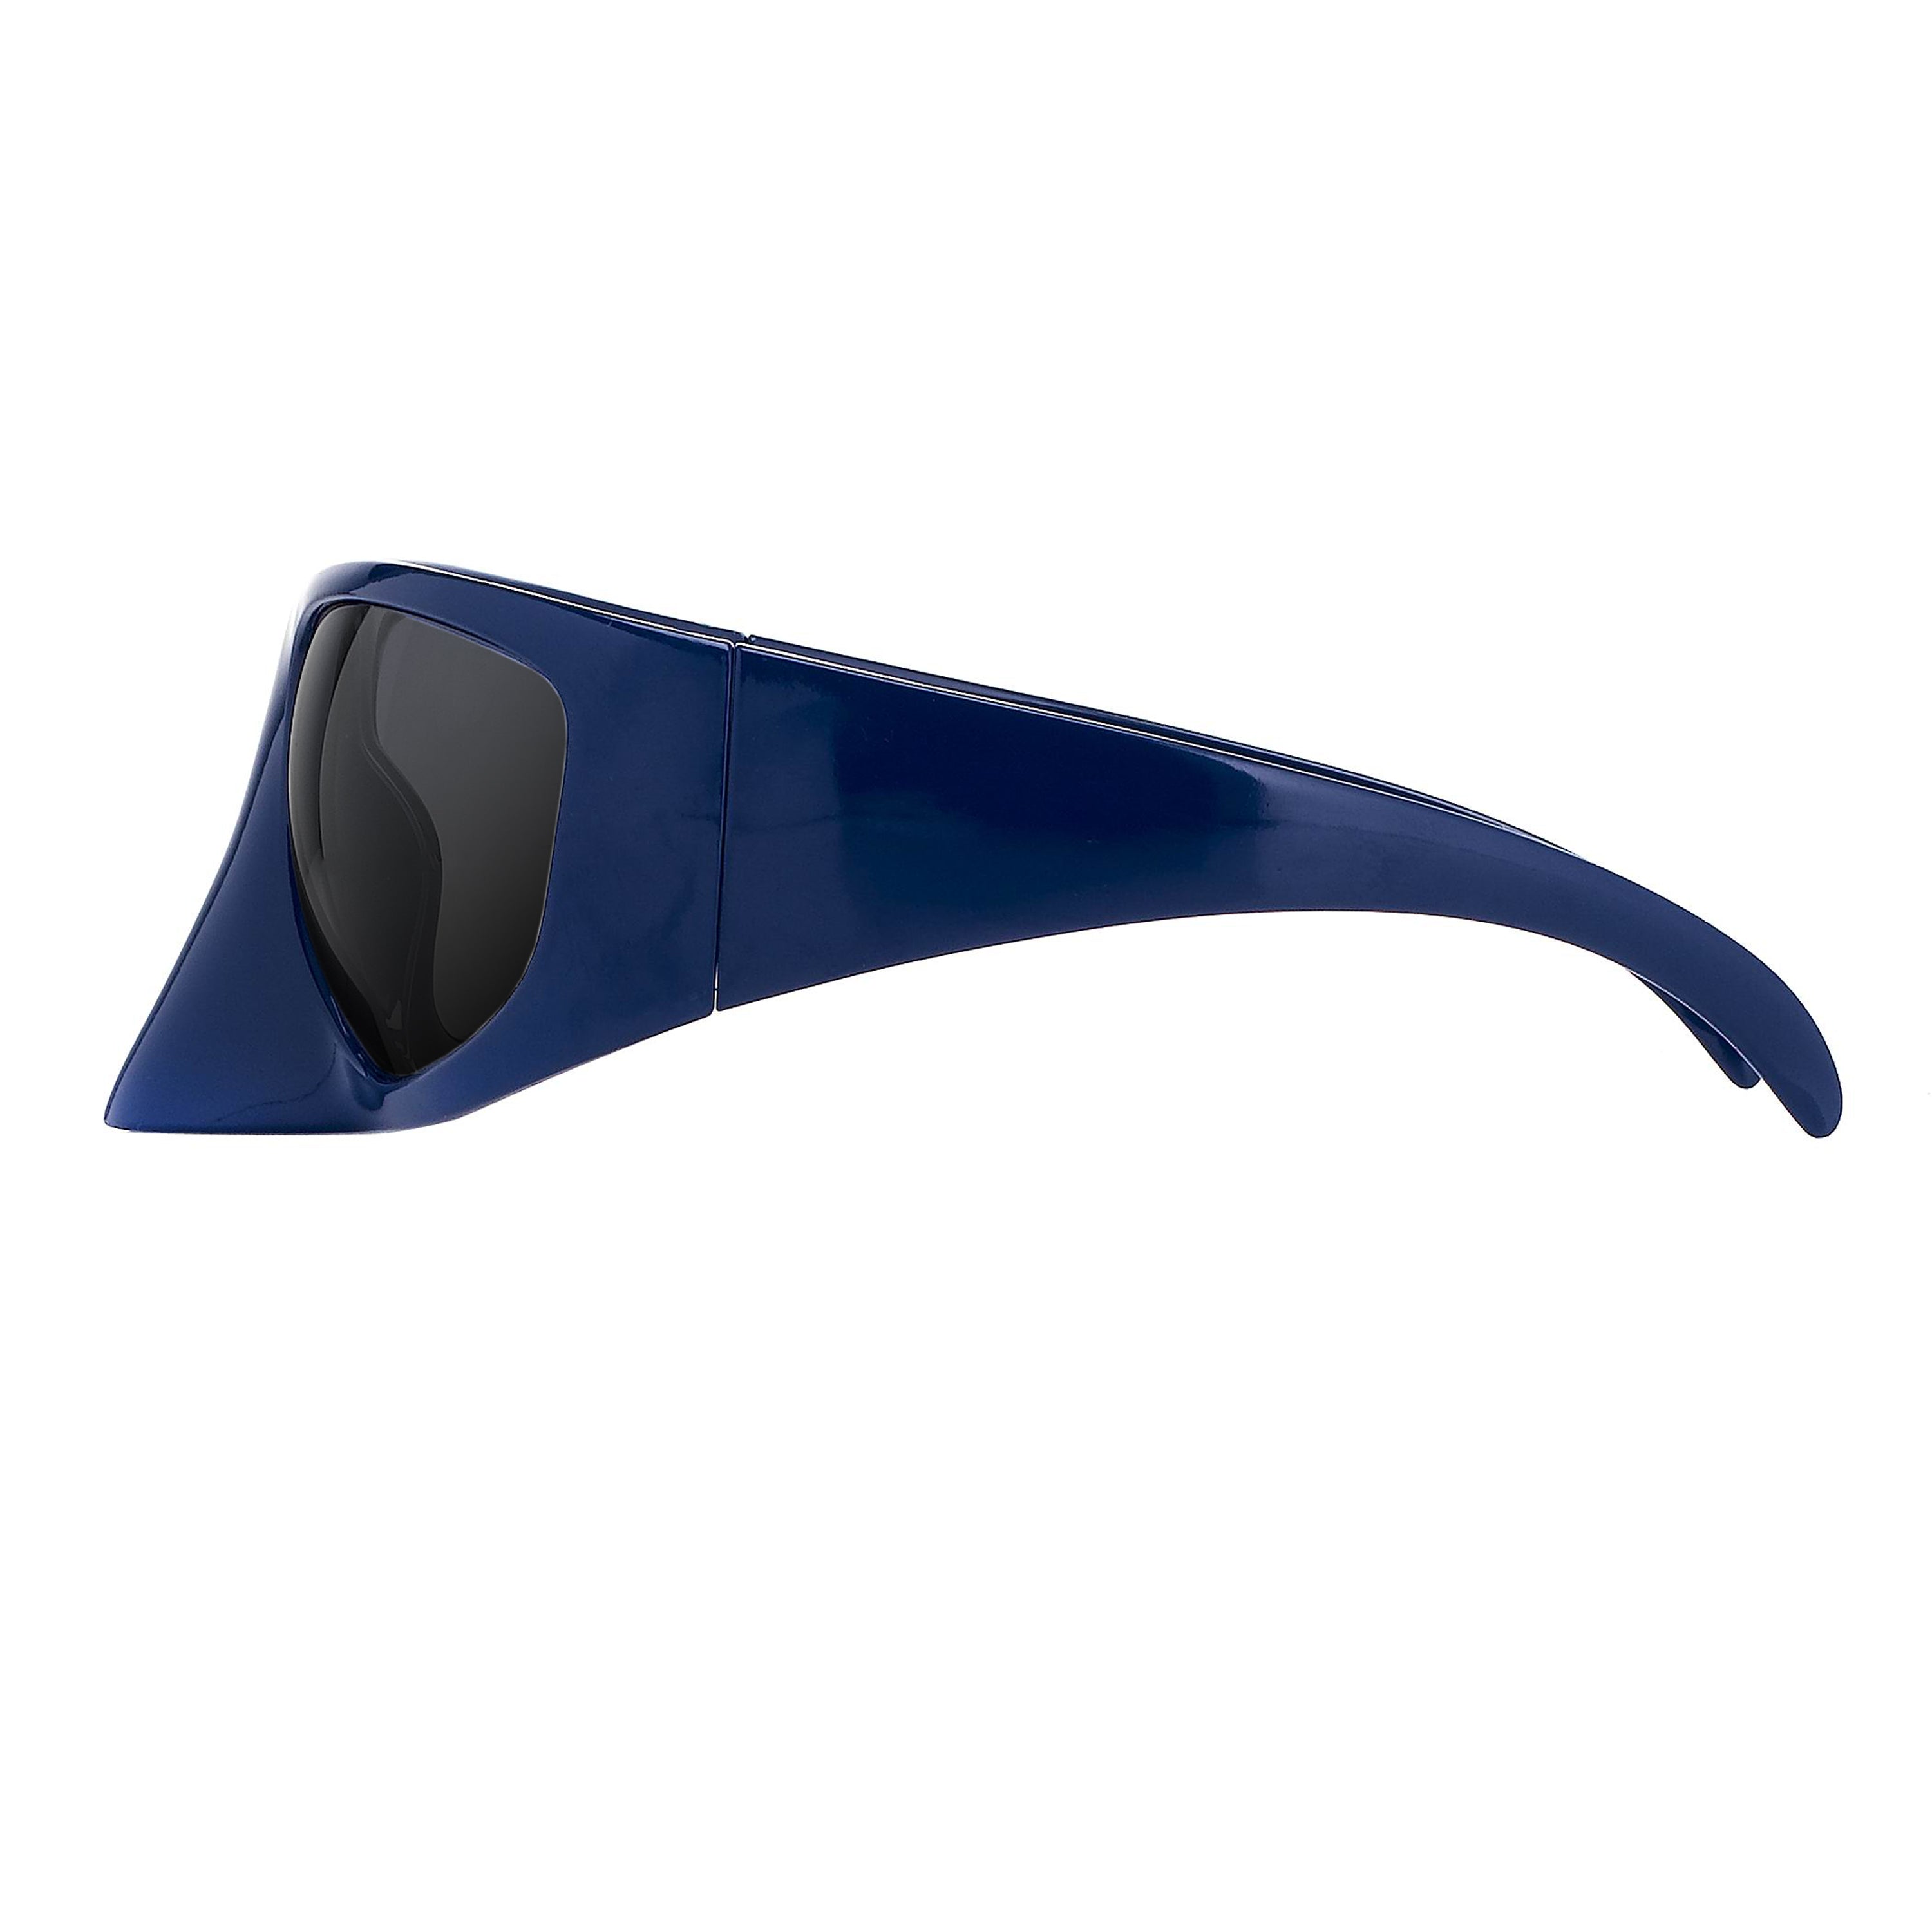 The Mask Sunglasses in Blue